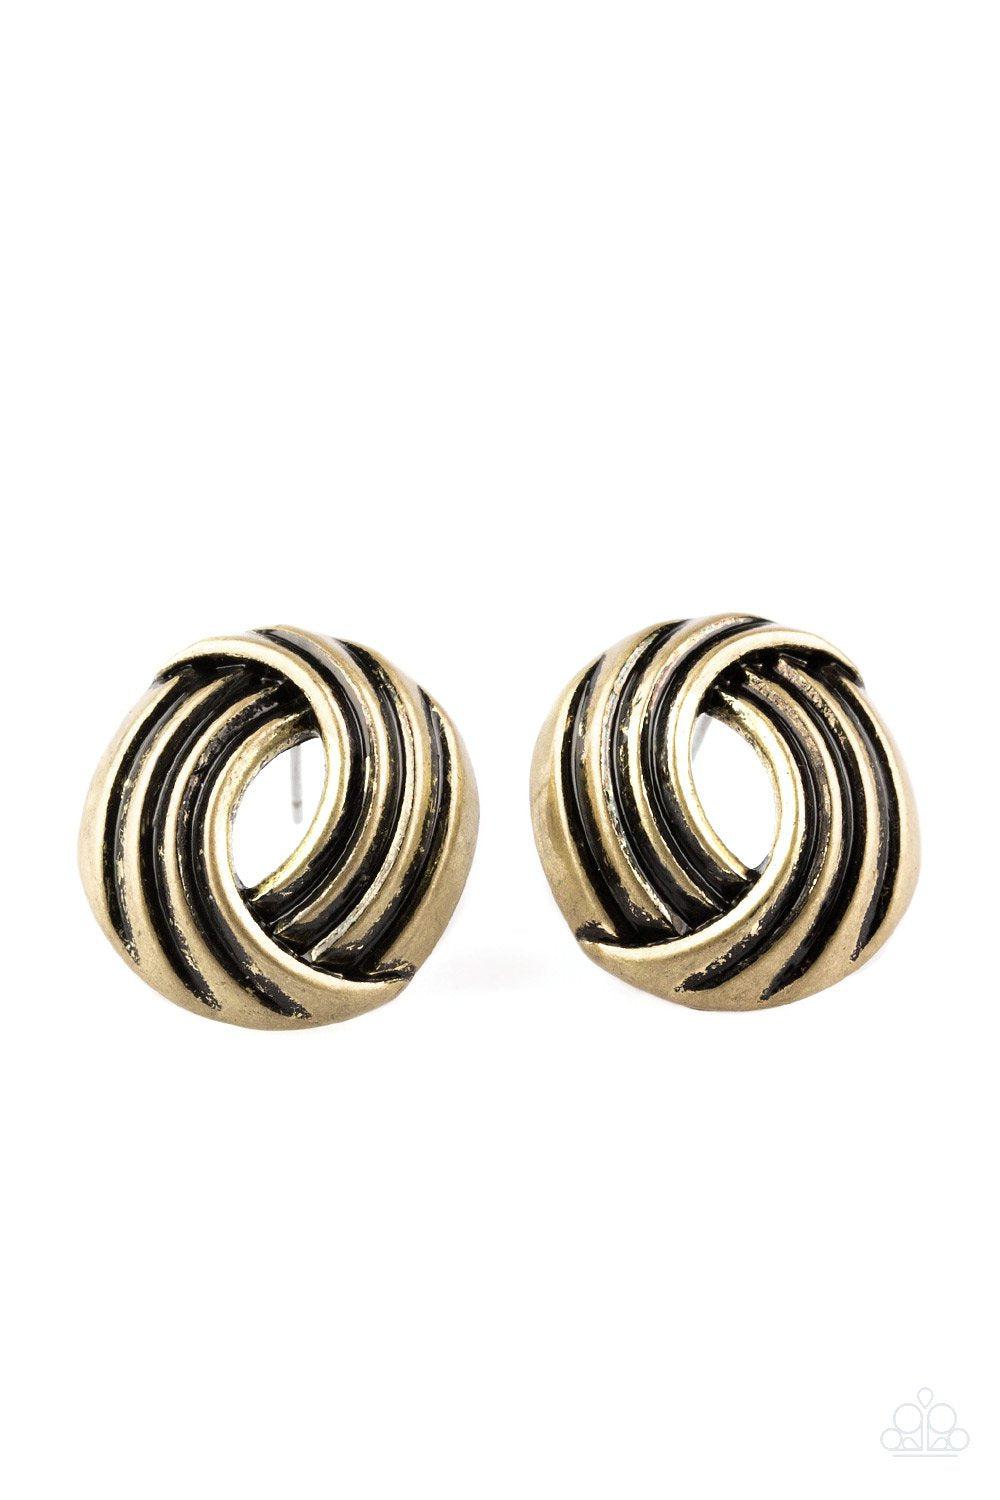 Rare Refinement Brass Post Earrings - Paparazzi Accessories- lightbox - CarasShop.com - $5 Jewelry by Cara Jewels